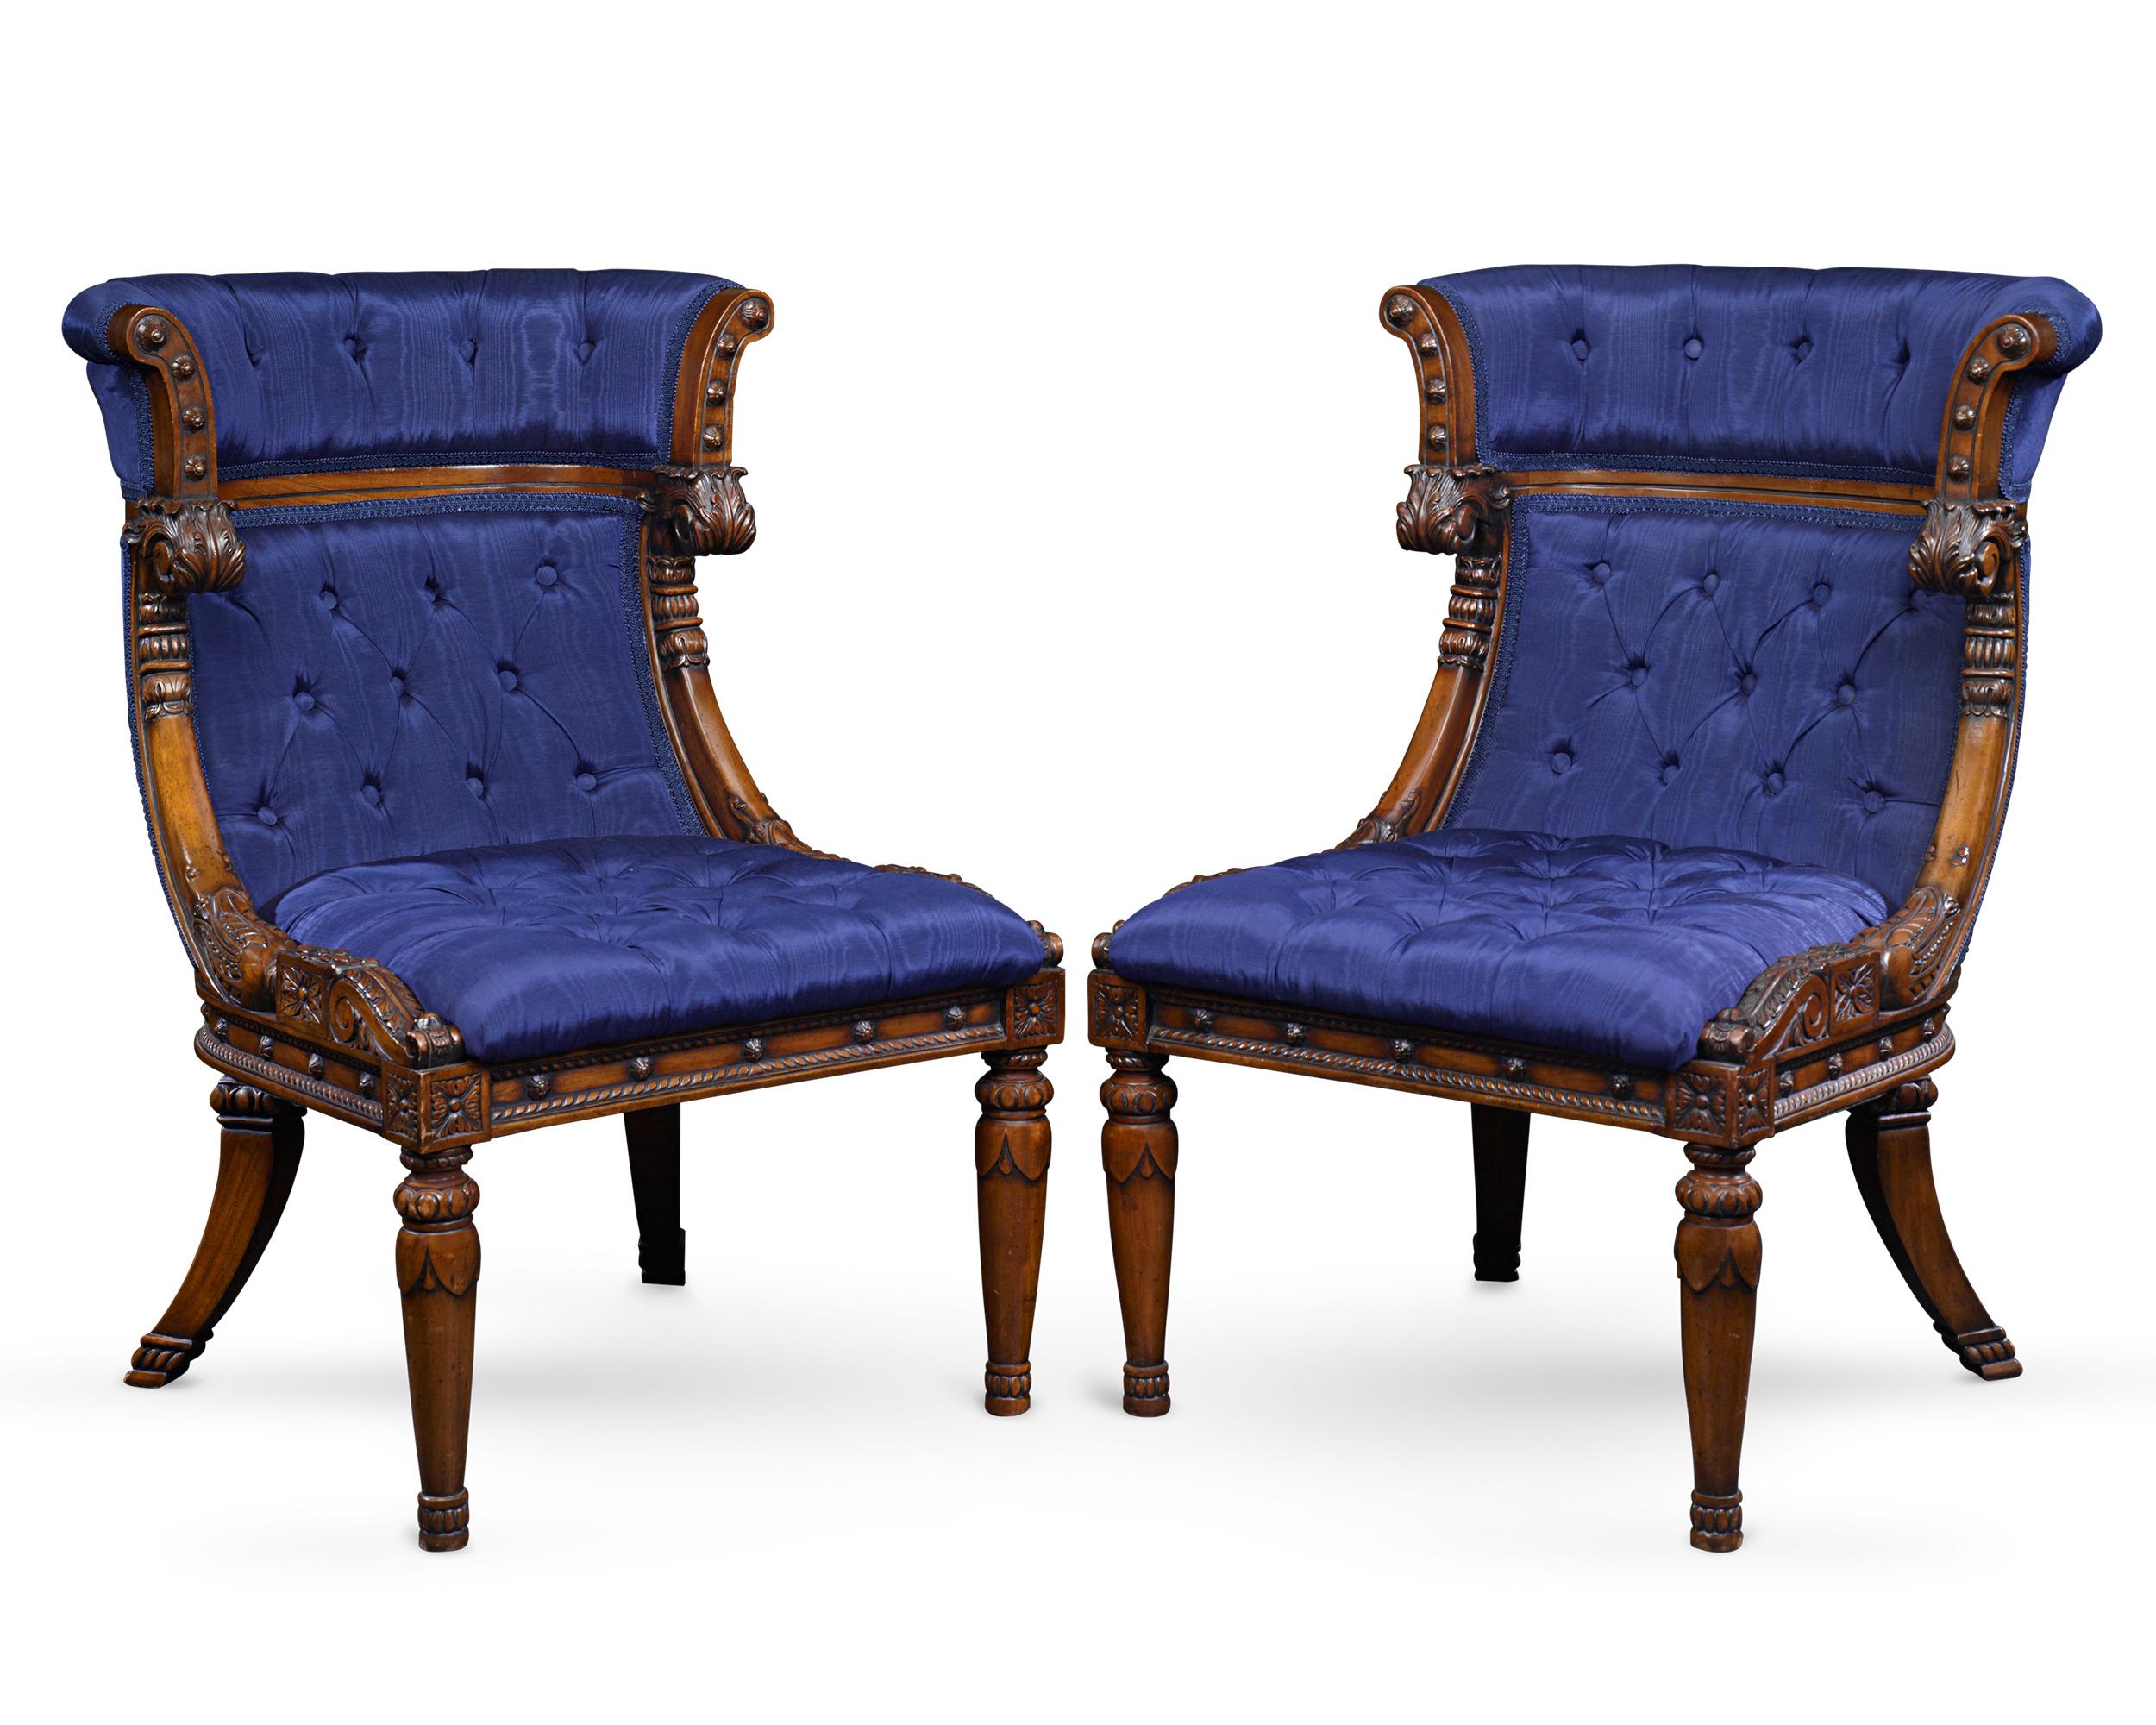 The beautiful design of this pair of French upholstered bergère chairs exemplifies the artistry and elegance of the Empire period. Exhibiting perfect proportions, the chairs are enhanced by royal blue upholstery and carved mahogany with symmetrical